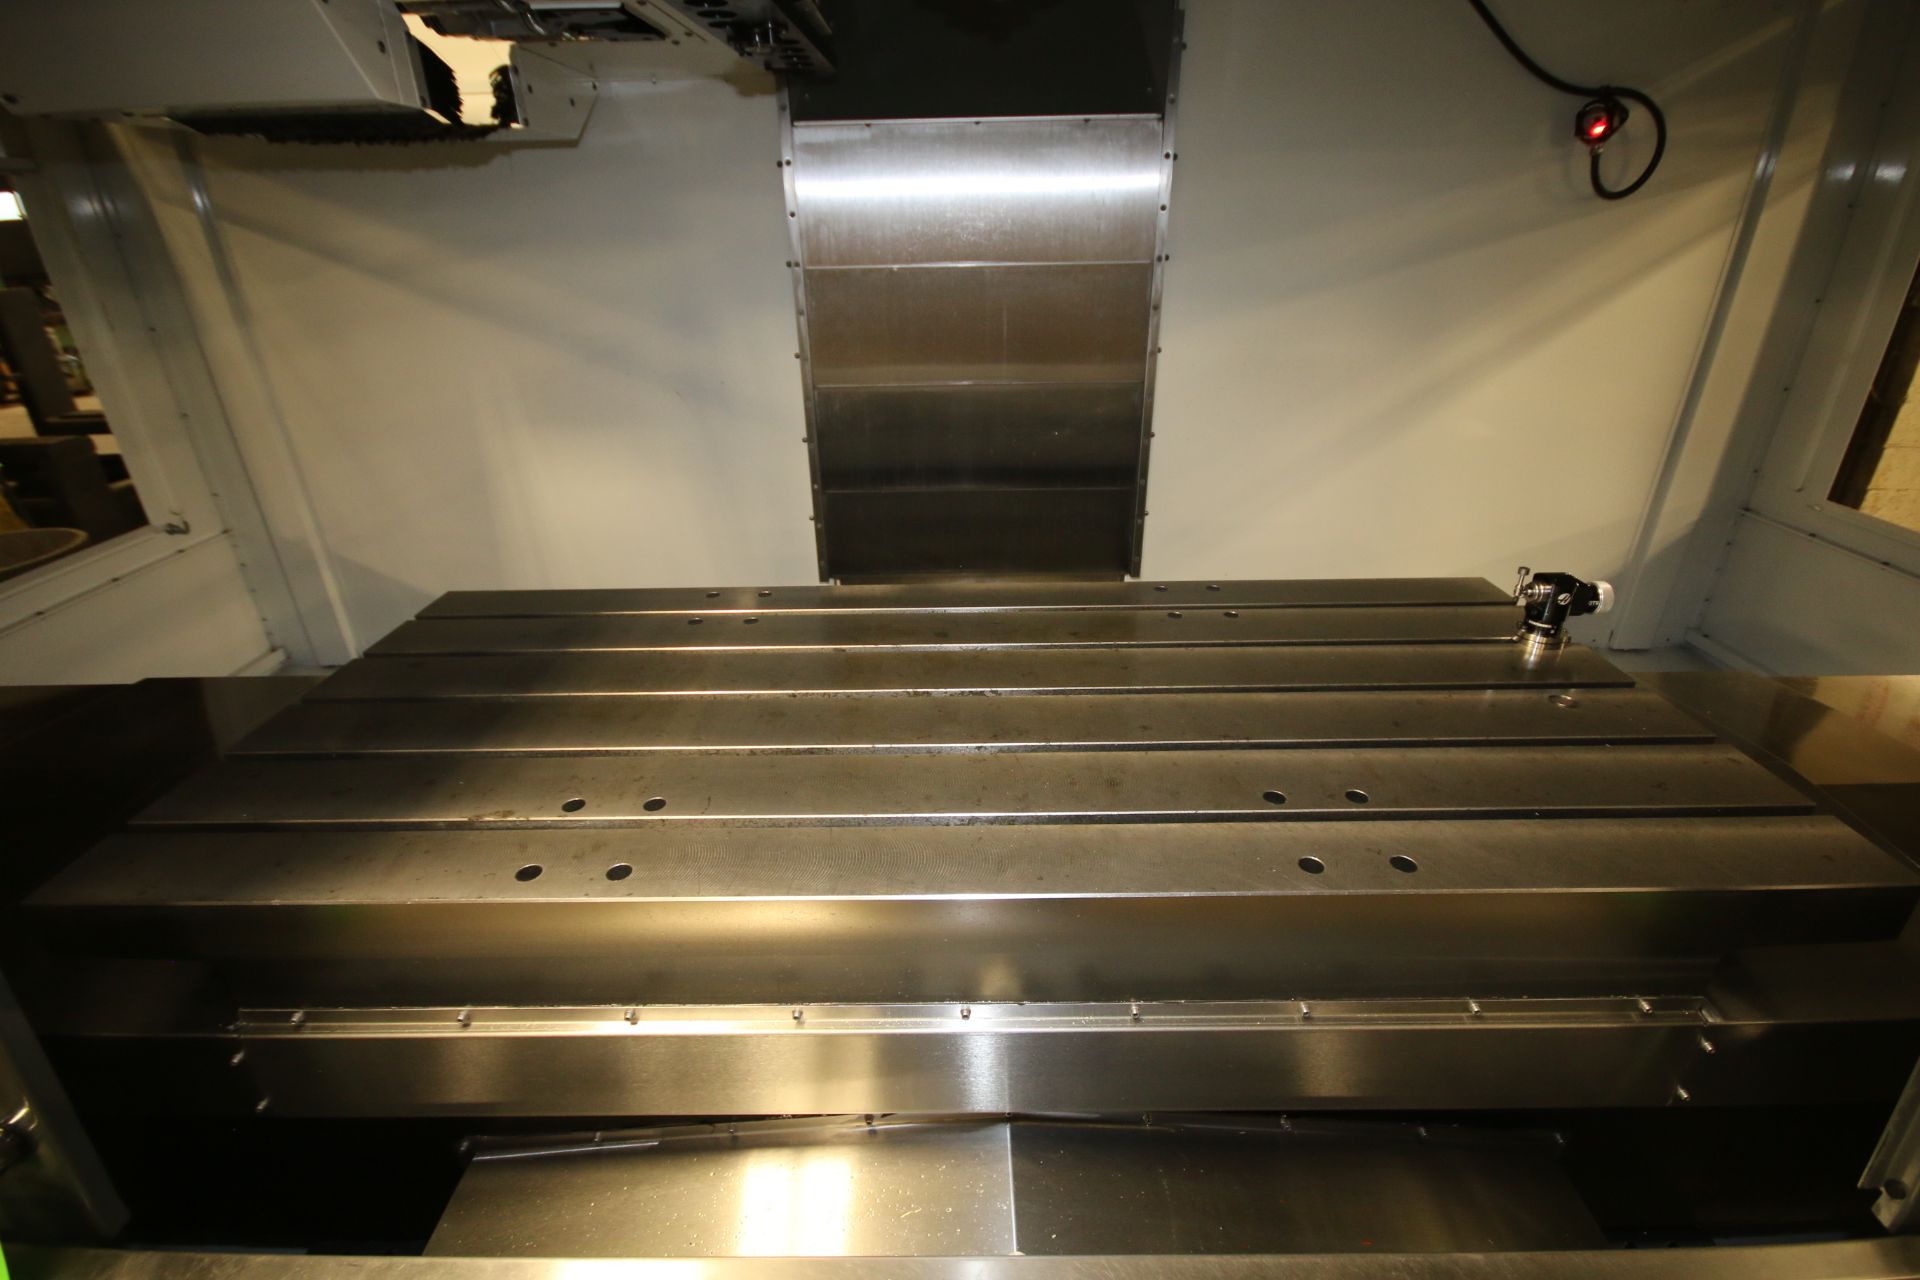 2013 Haas VF-6/50 Vertical CNC Machining Center, Model VF-6/50, S/N 1108325, Set Up with 50 Taper, - Image 2 of 4